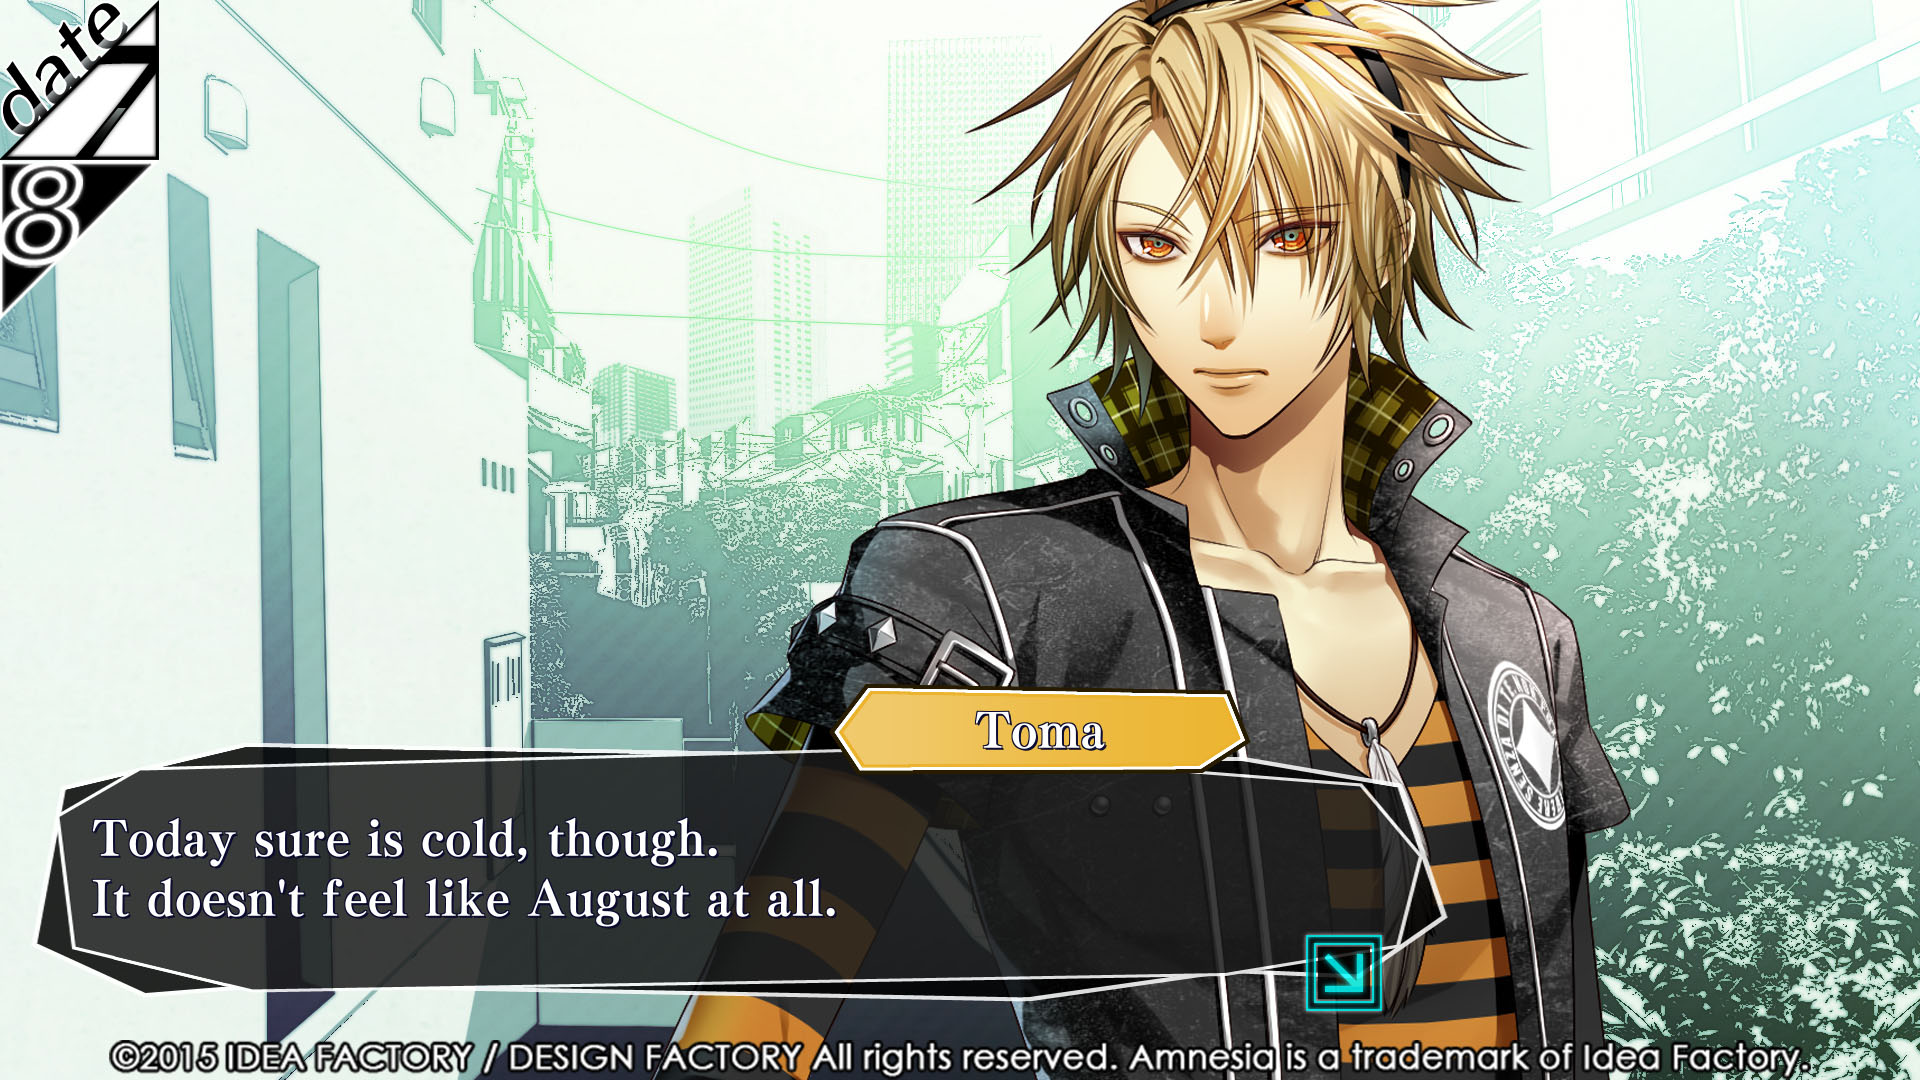 anime games dating is it a hookup or something more